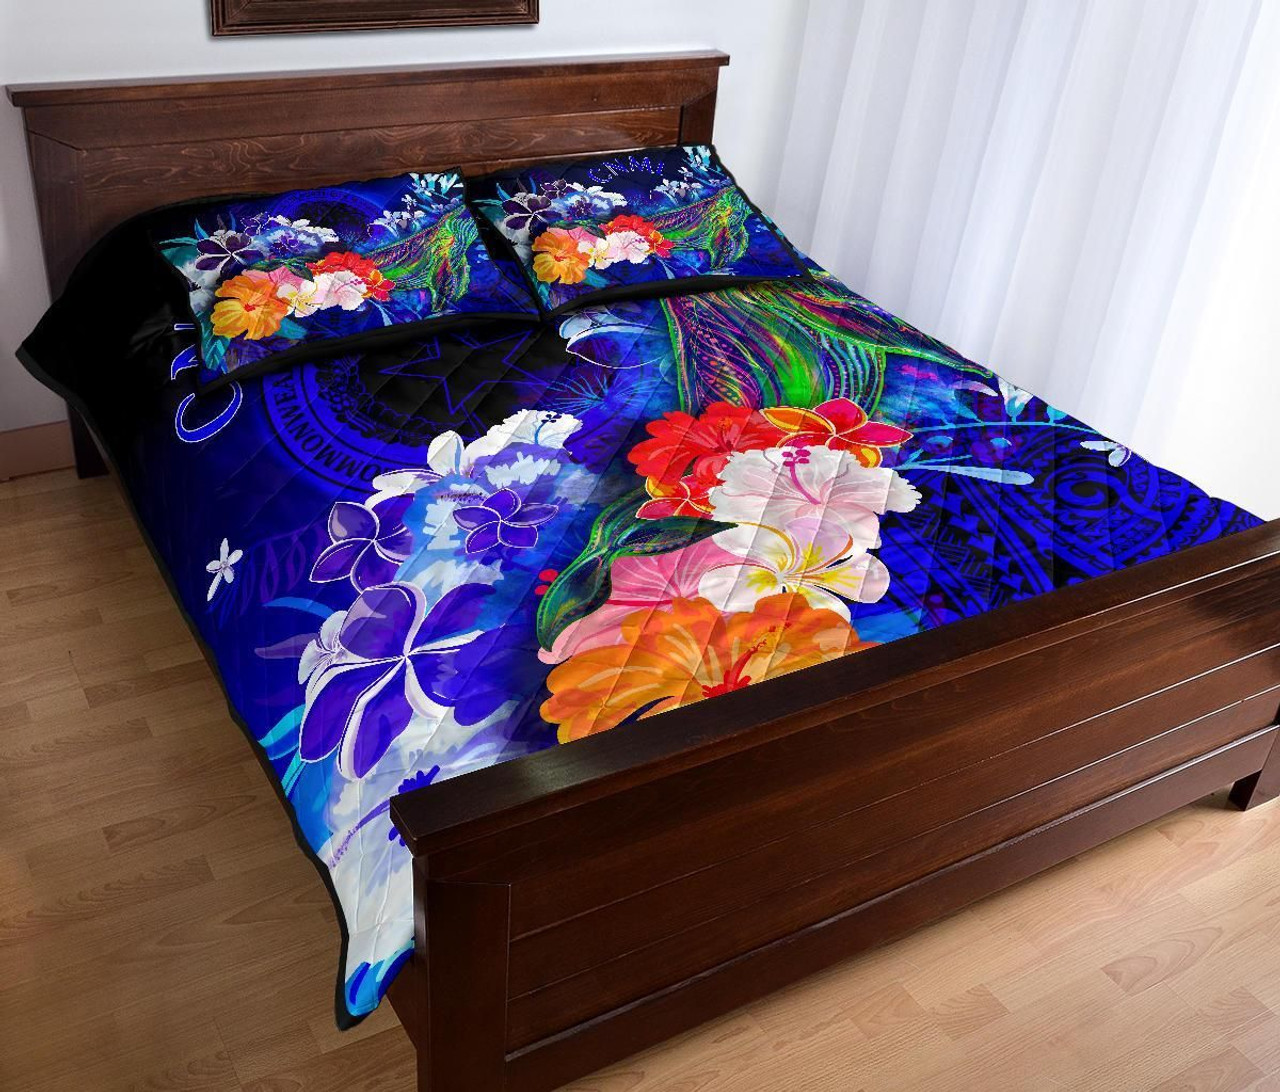 CNMI Quilt Bed Set - Humpback Whale with Tropical Flowers (Blue) 3